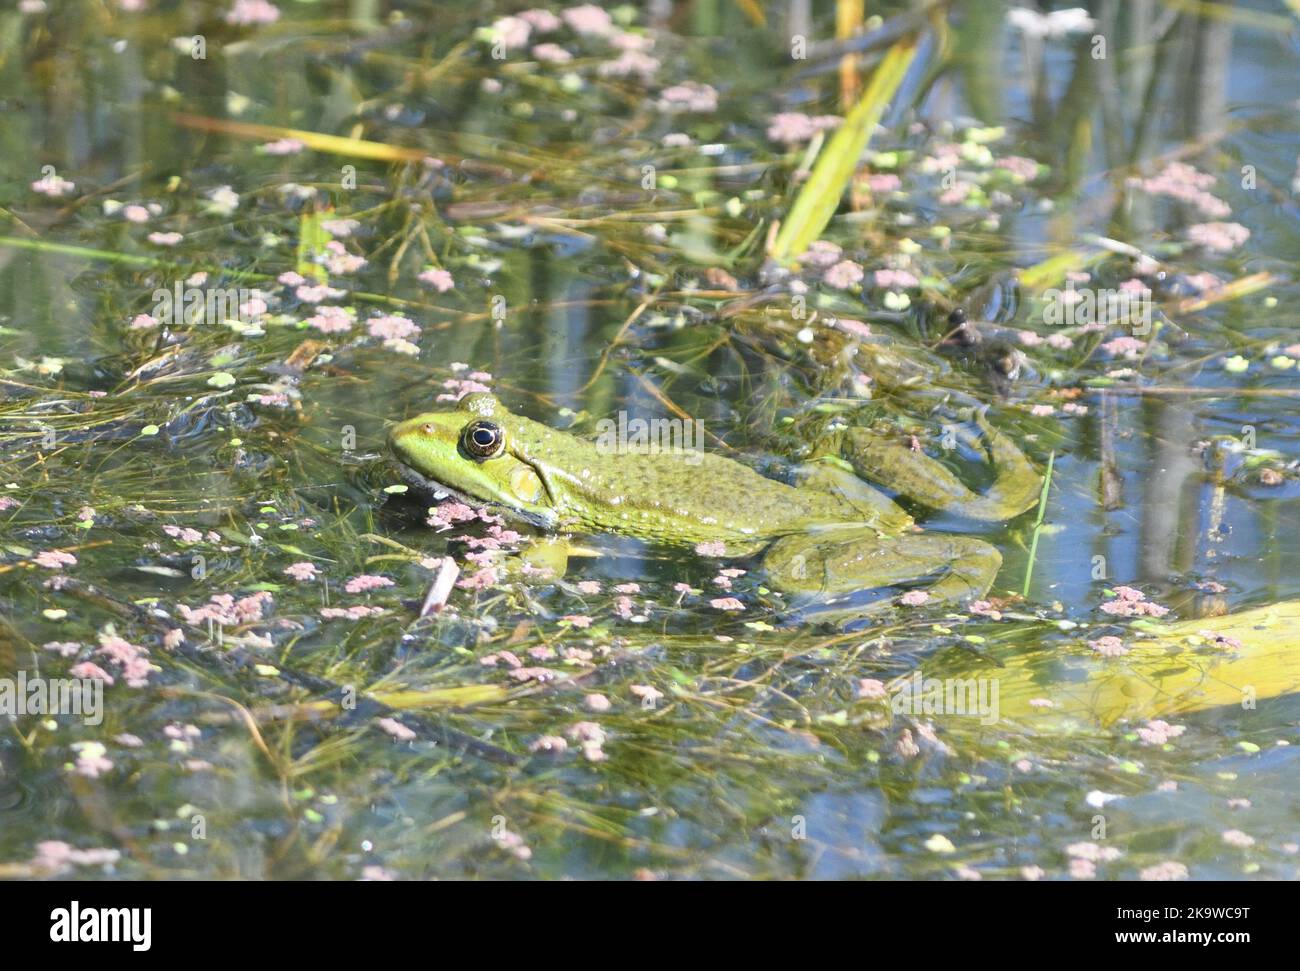 A marsh frog (Pelophylax ridibundus, formerly Rana ridibunda) appears to enjoy the warmth of the sun in a pool. Marsh frogs are Europe’s largest frog Stock Photo